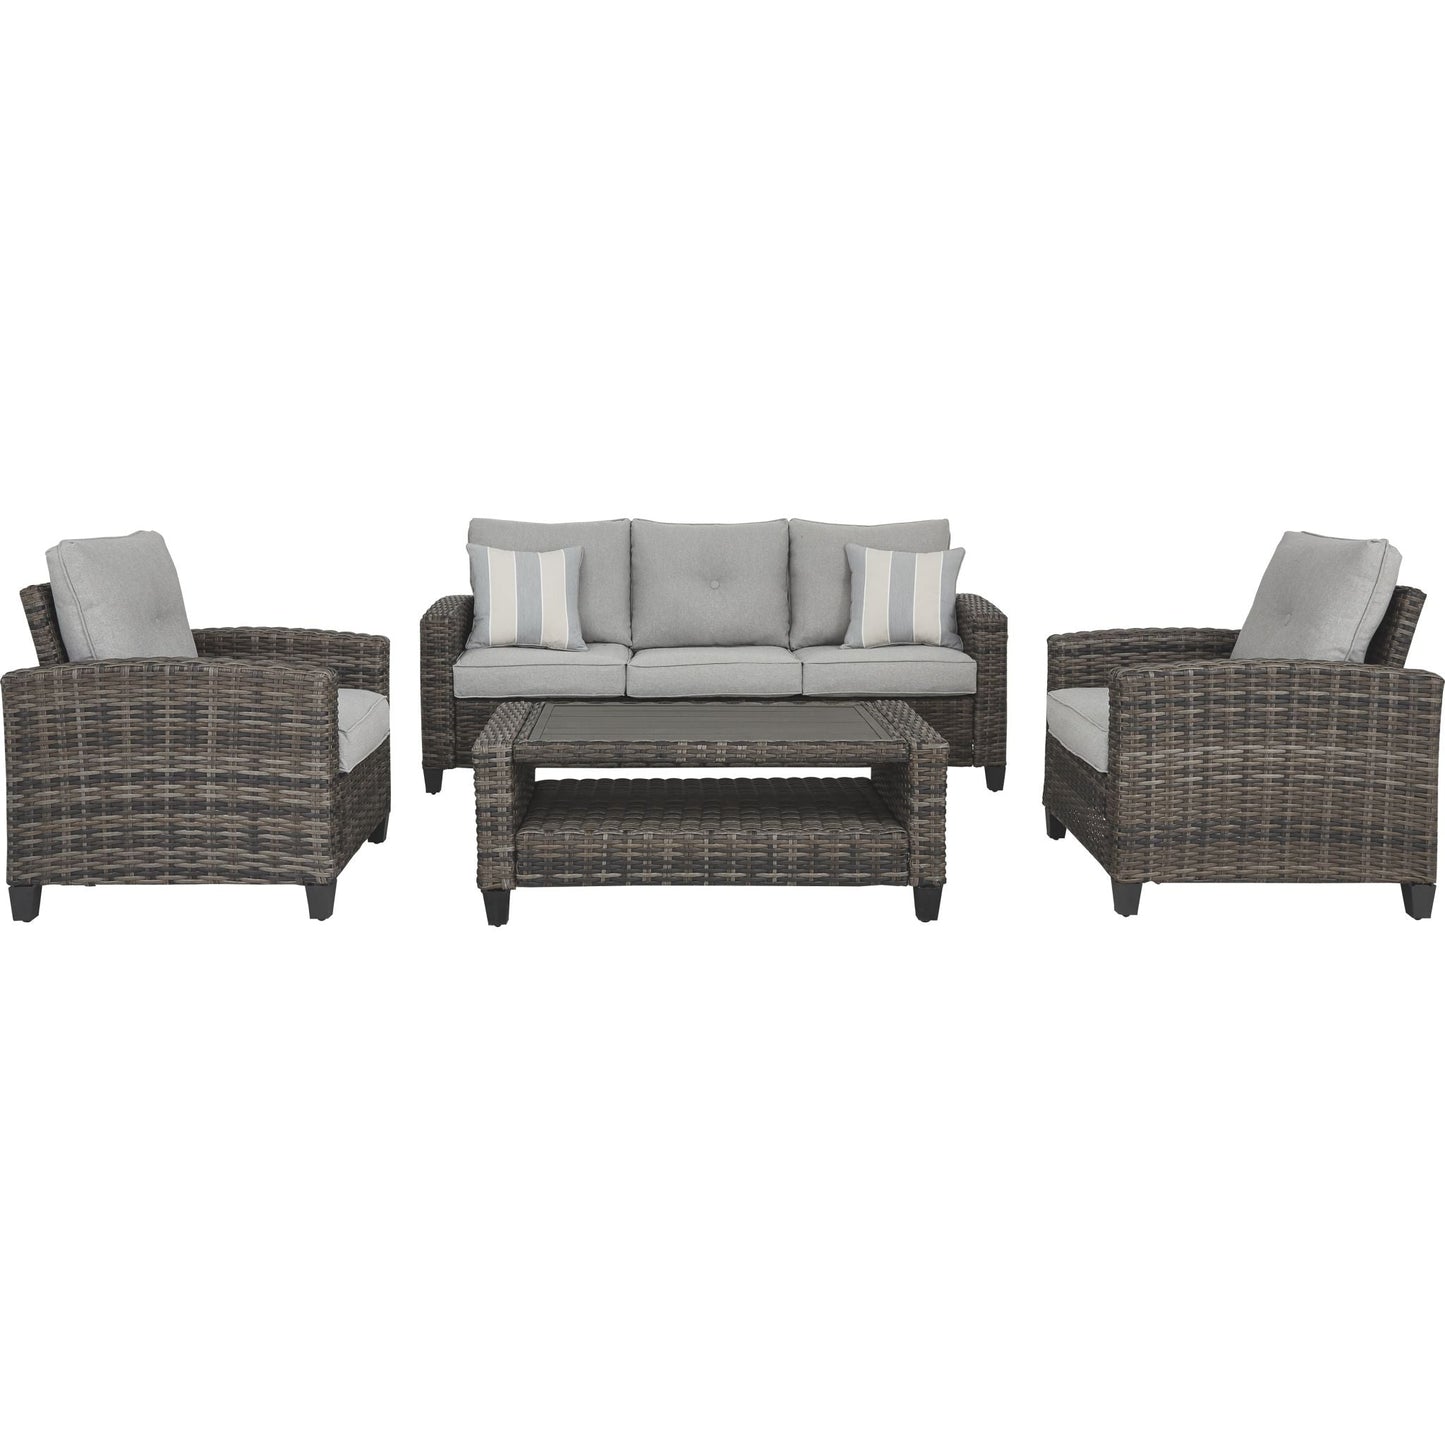 Outdoor Cloverbrooke Sofa, Pair of Chairs and Table Gray